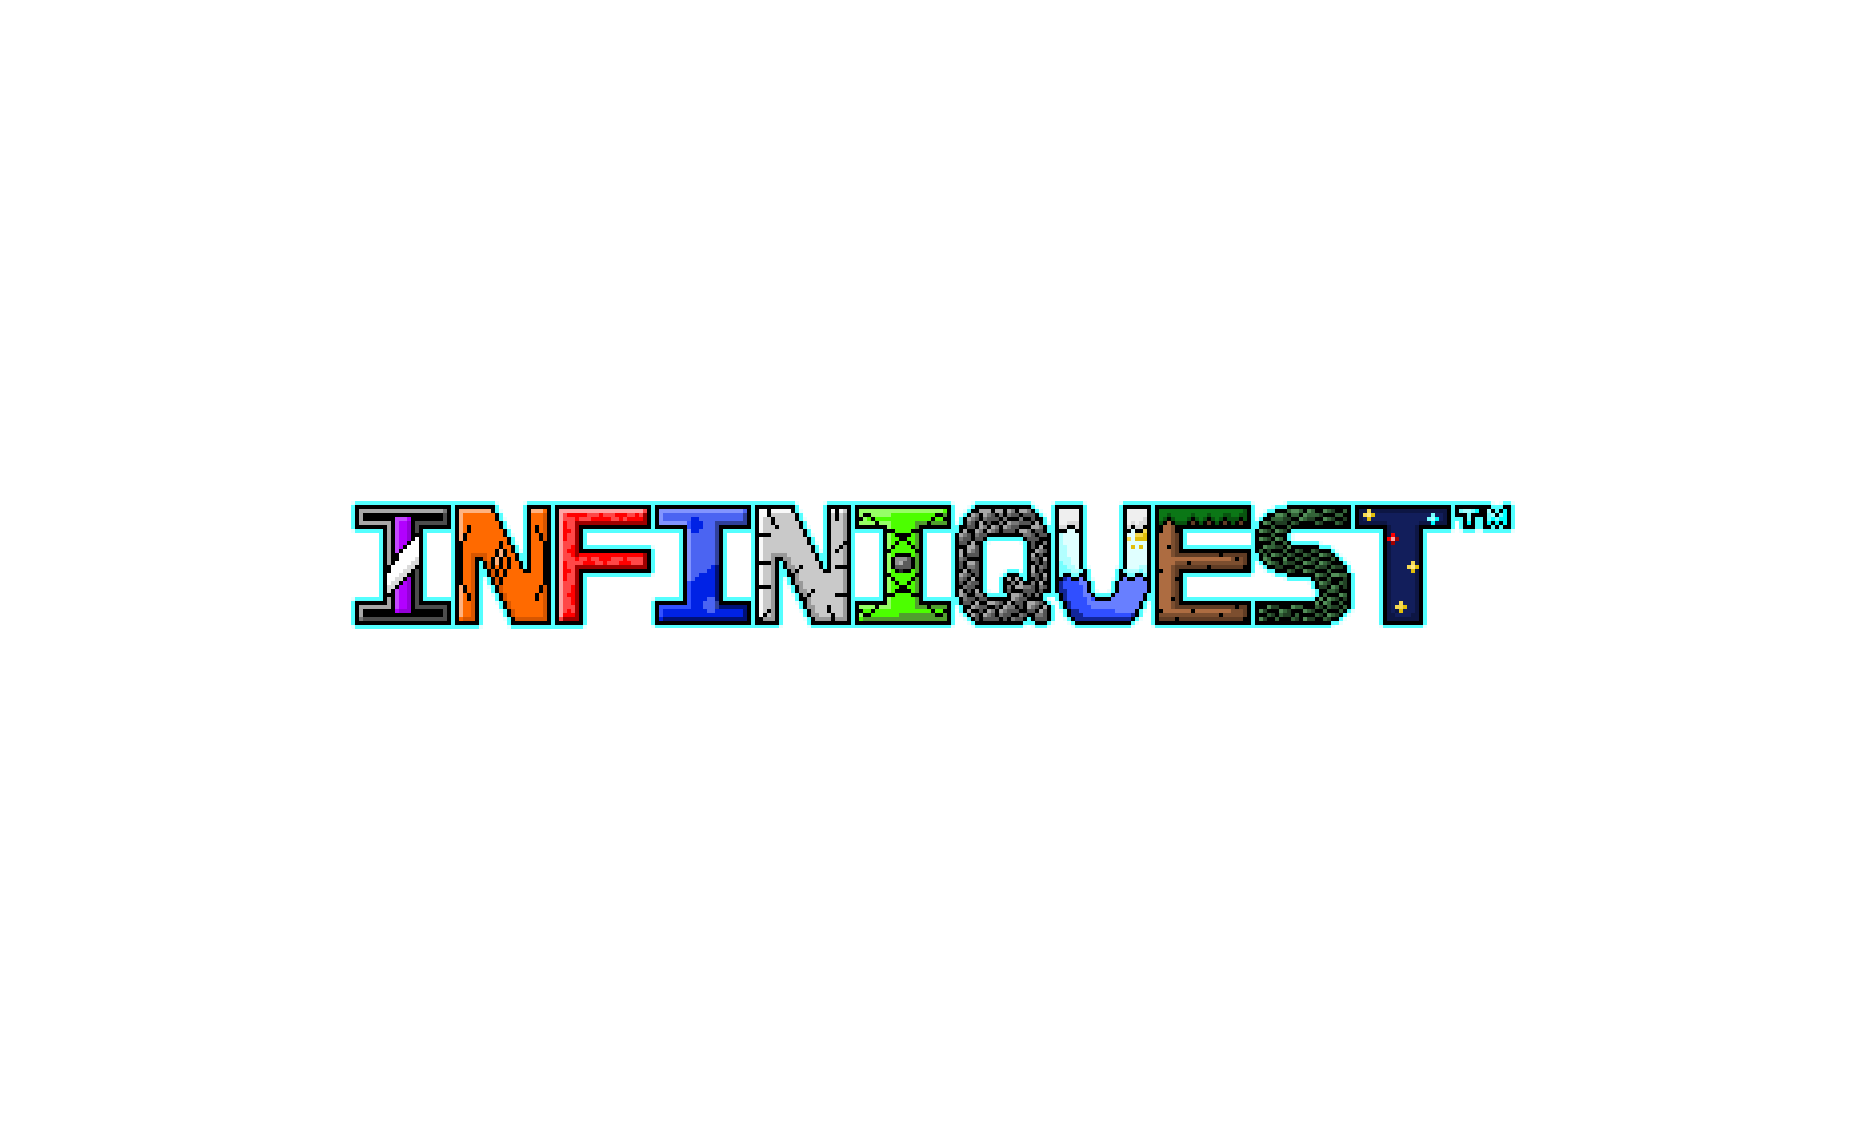 Hello! I'm MosaicArts here with Infiniquest